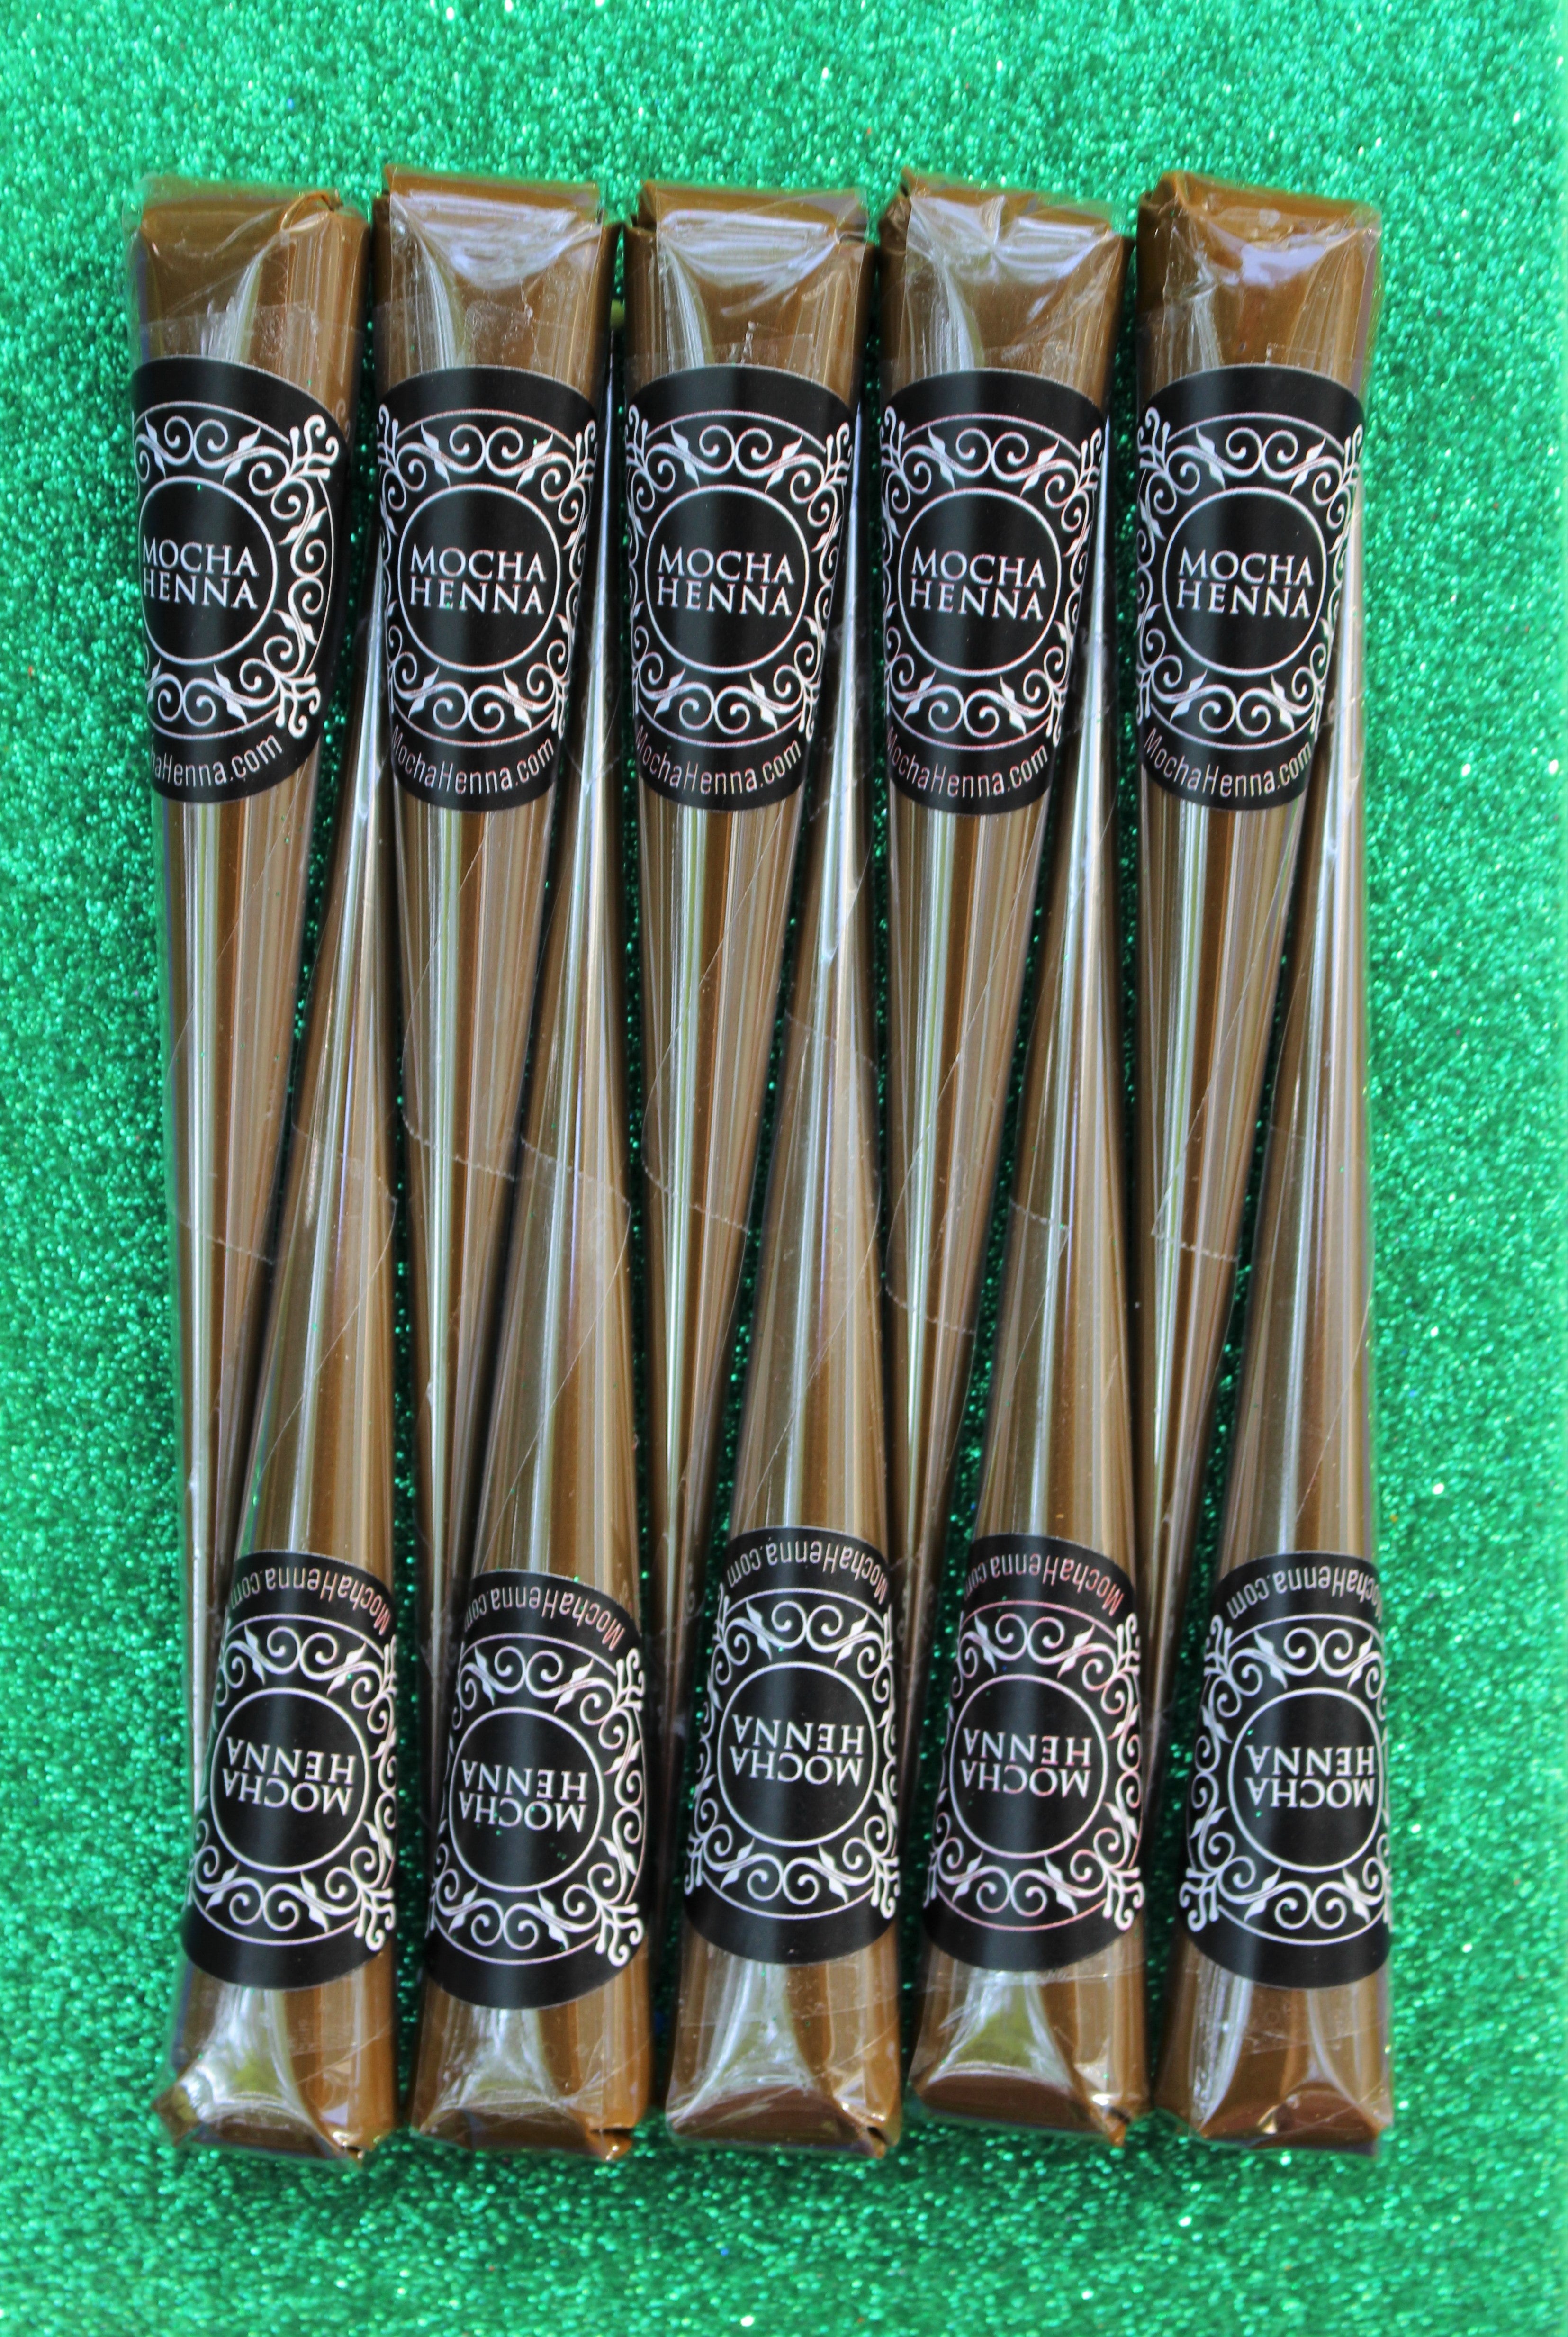 10 PACK of 100% Natural Henna Cones